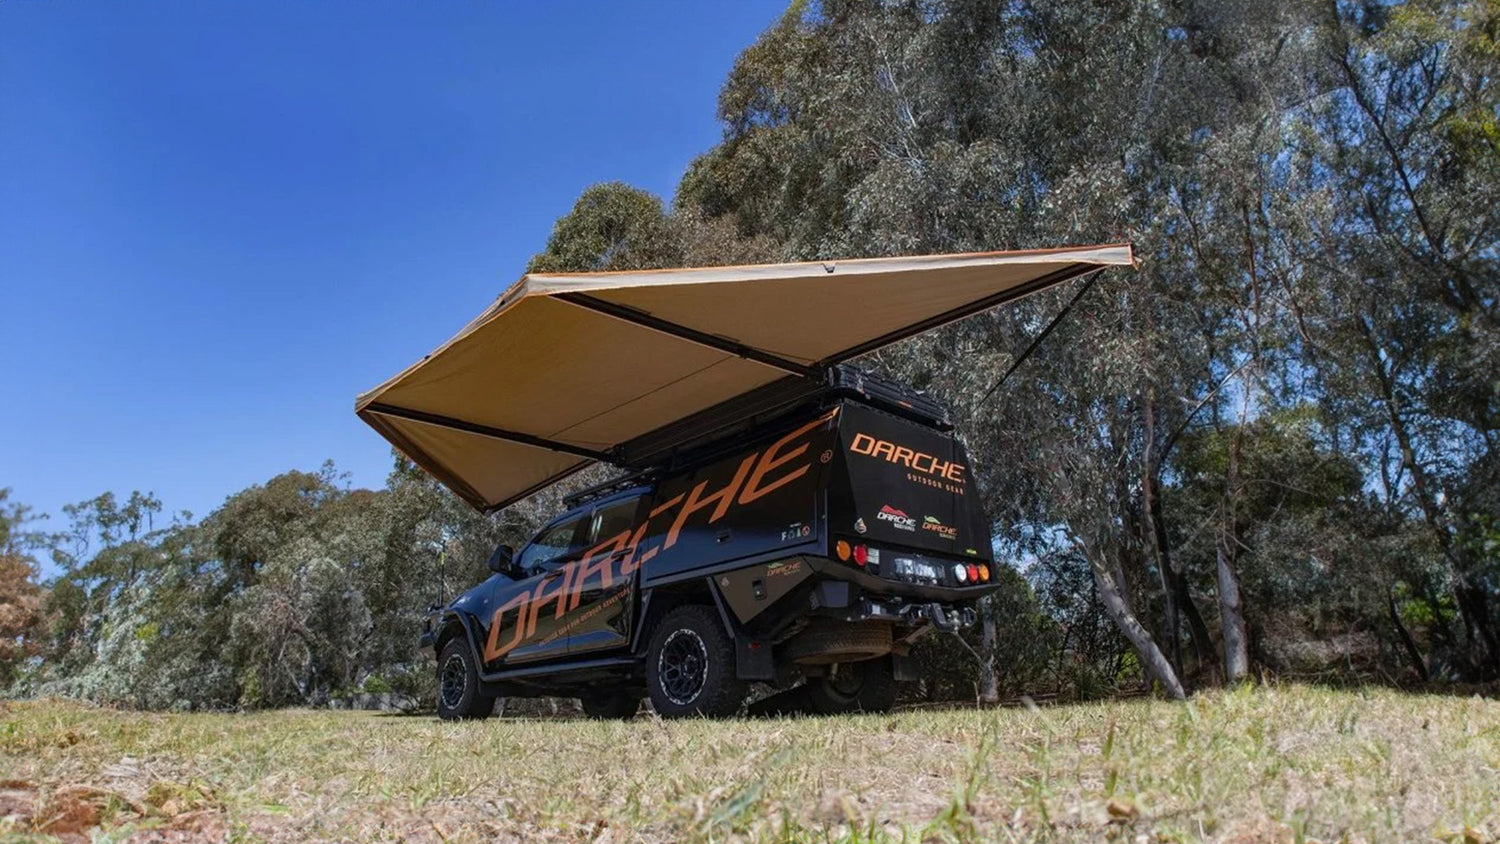 Awnings and Annexes - NZ Offroader